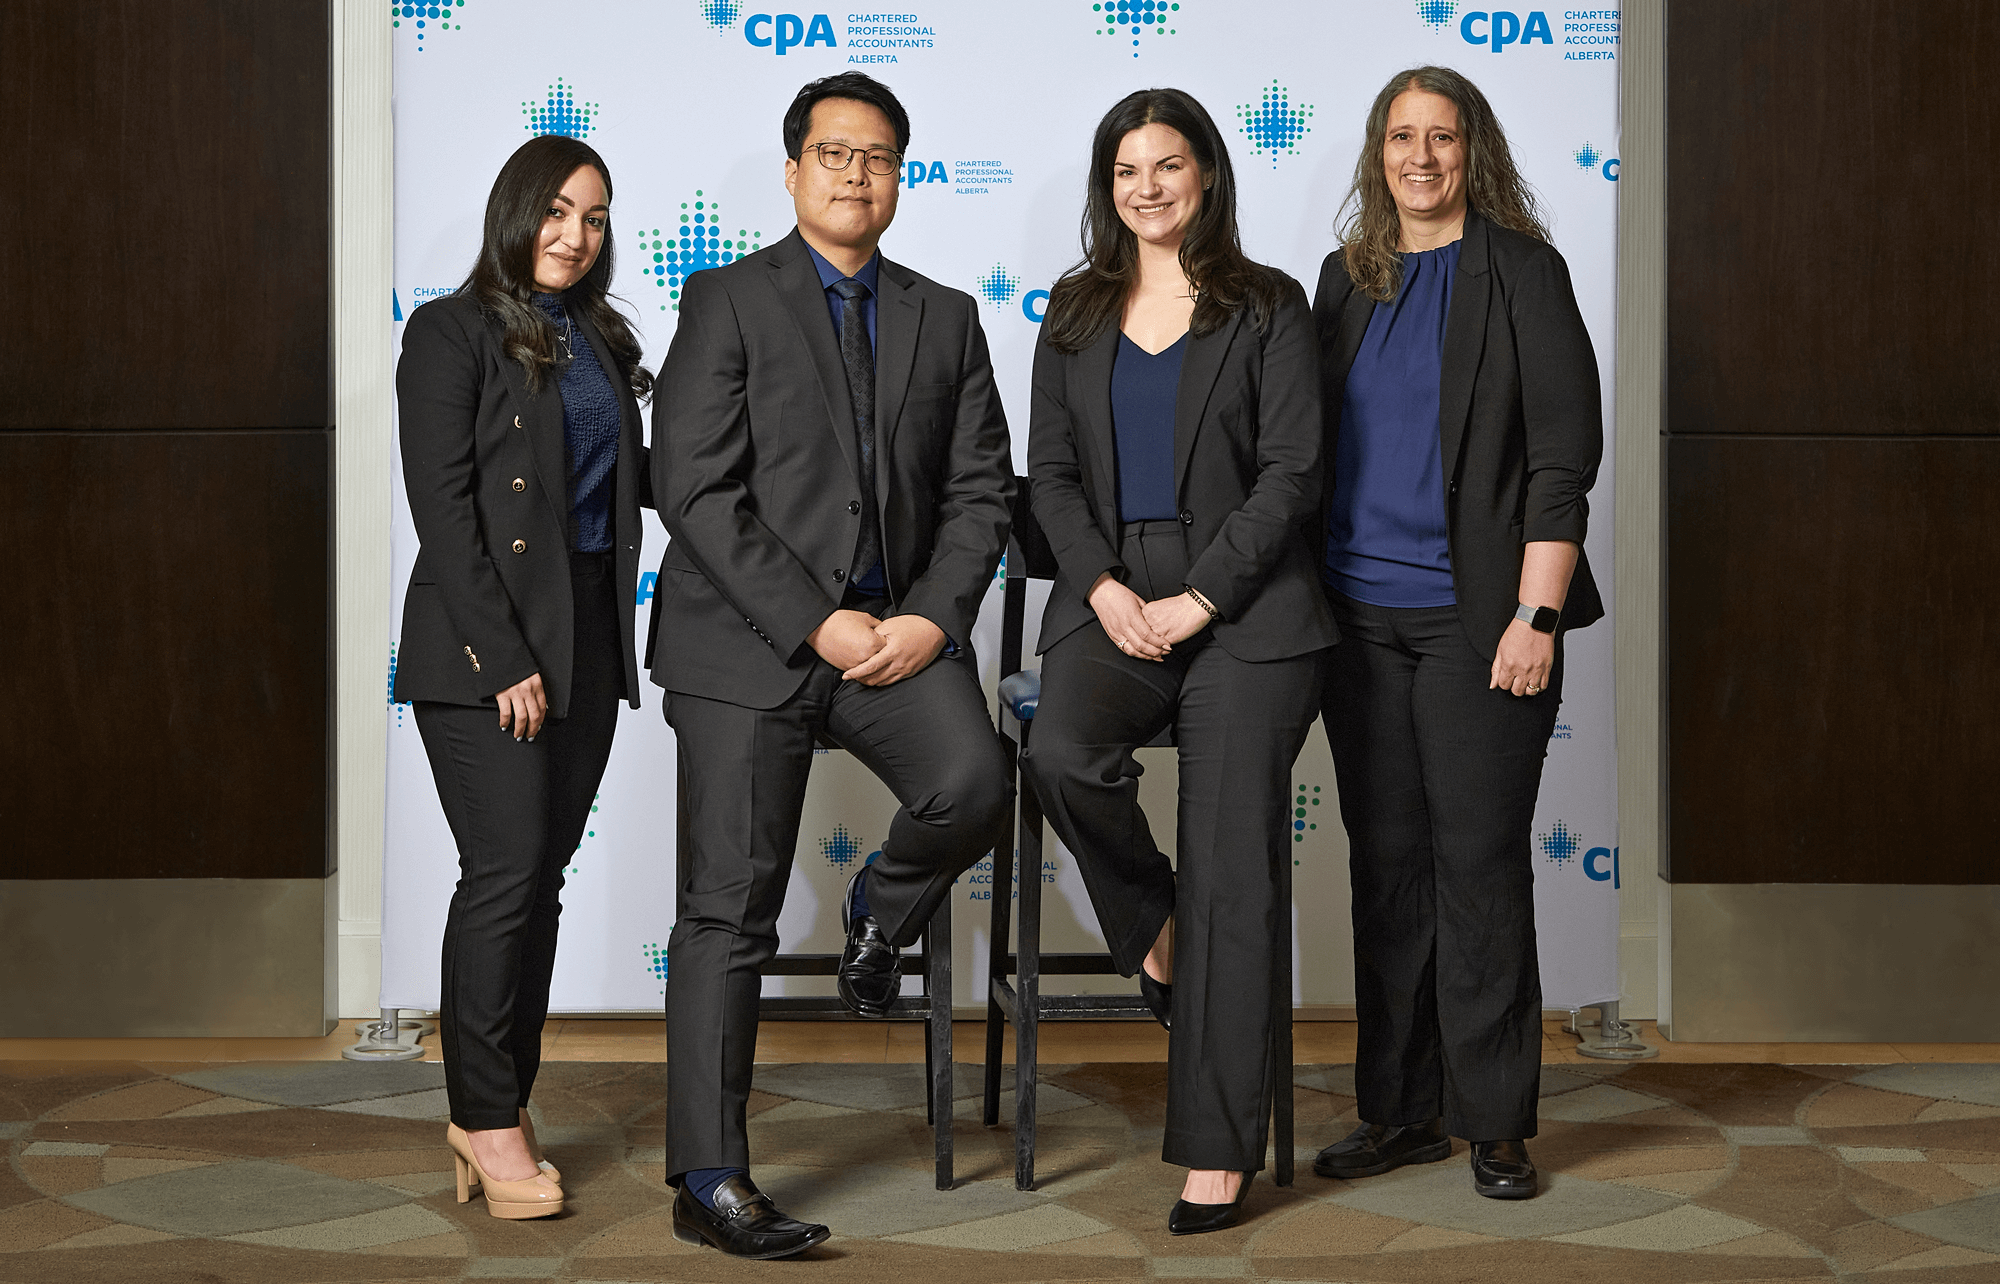 4 Athabasca University business students pose for the camera after competing at a business case competition